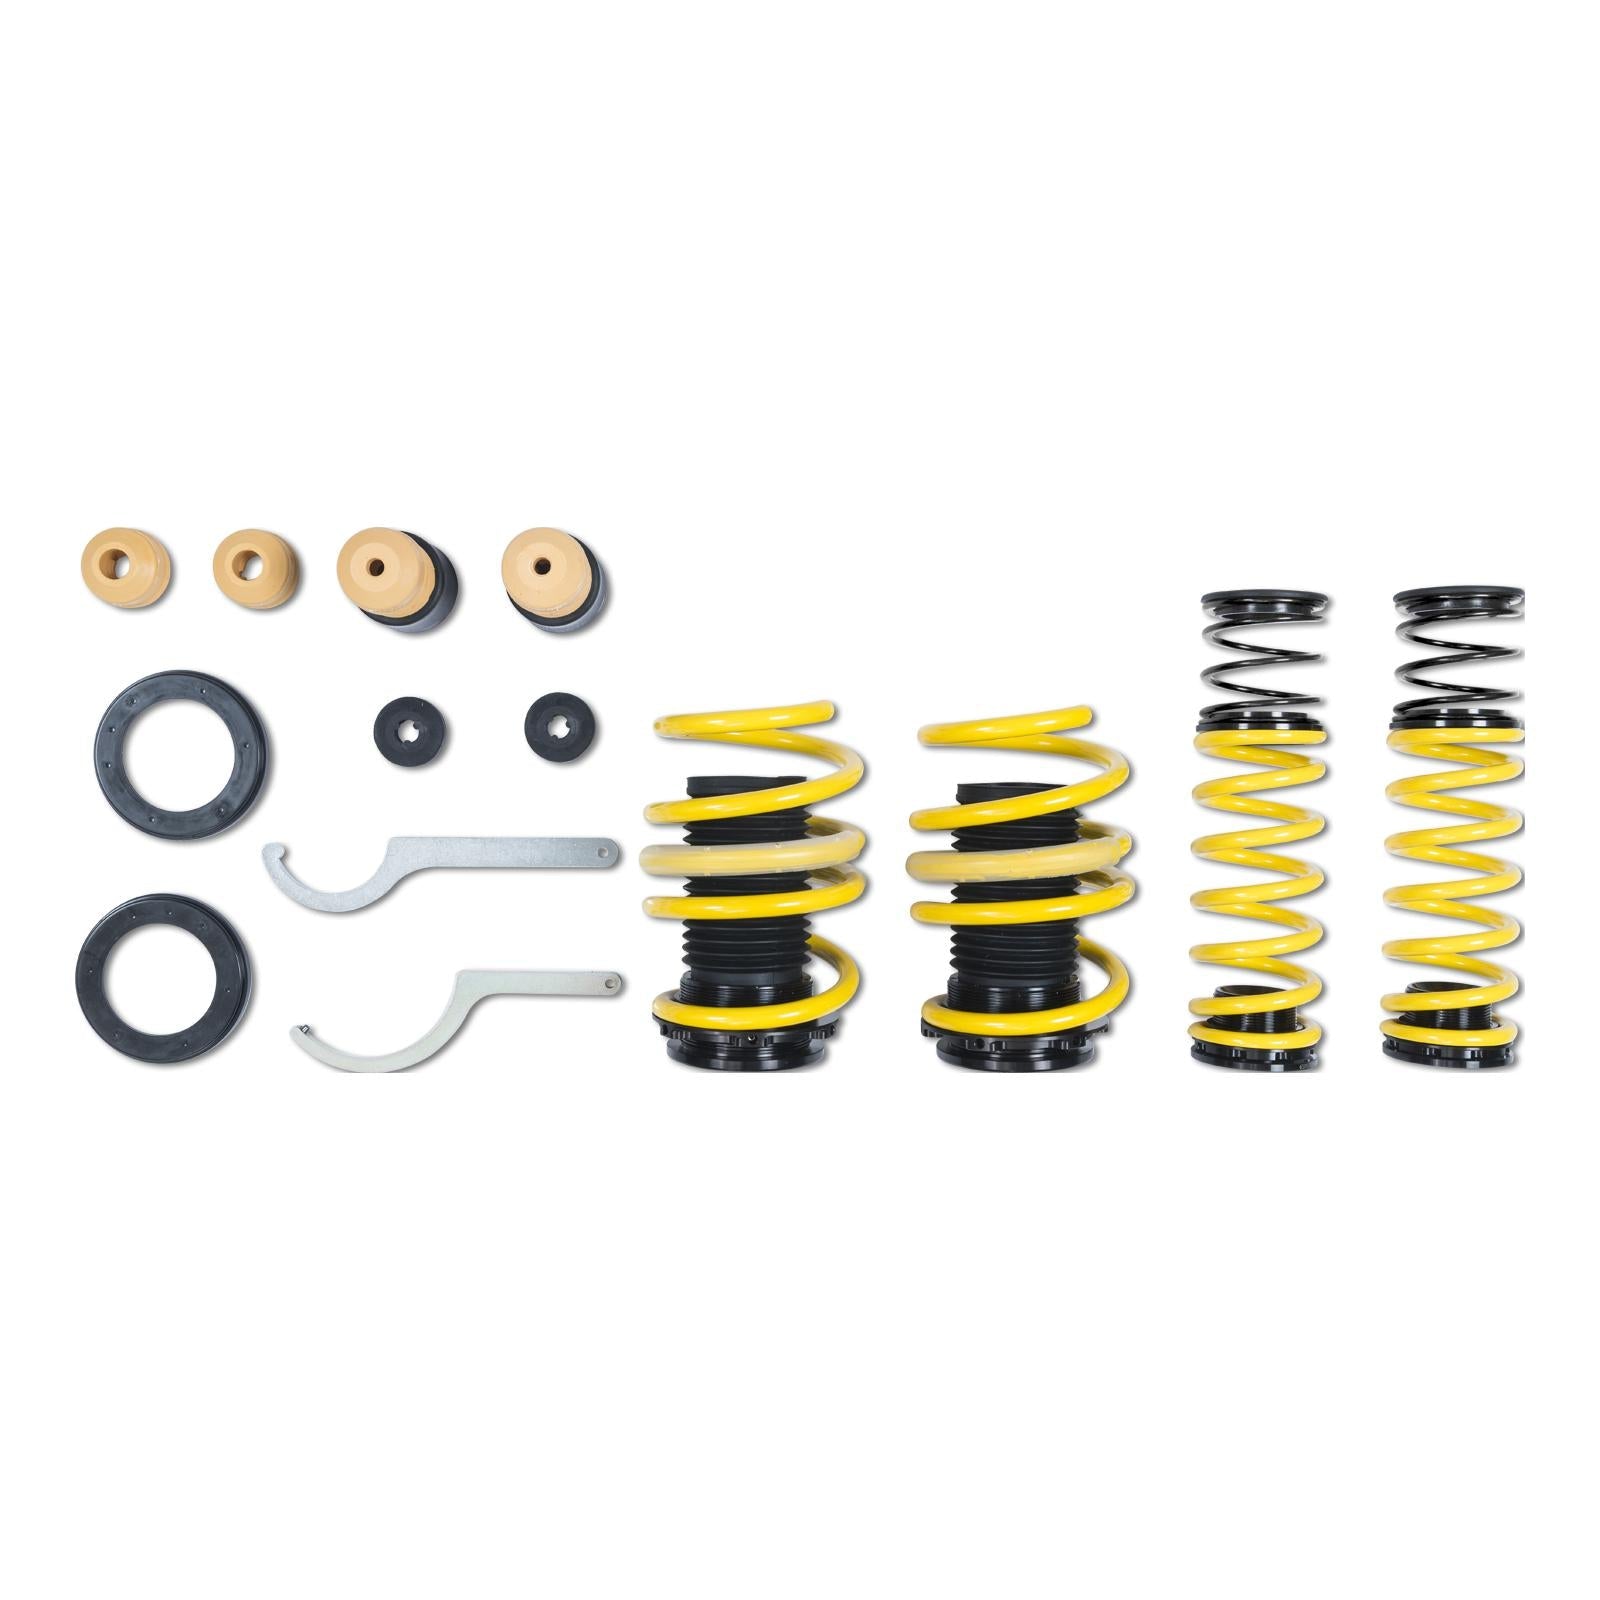 ST Suspensions Adjustable Lowering Springs - BMW G05 X5 xDrive With Electronic Dampers